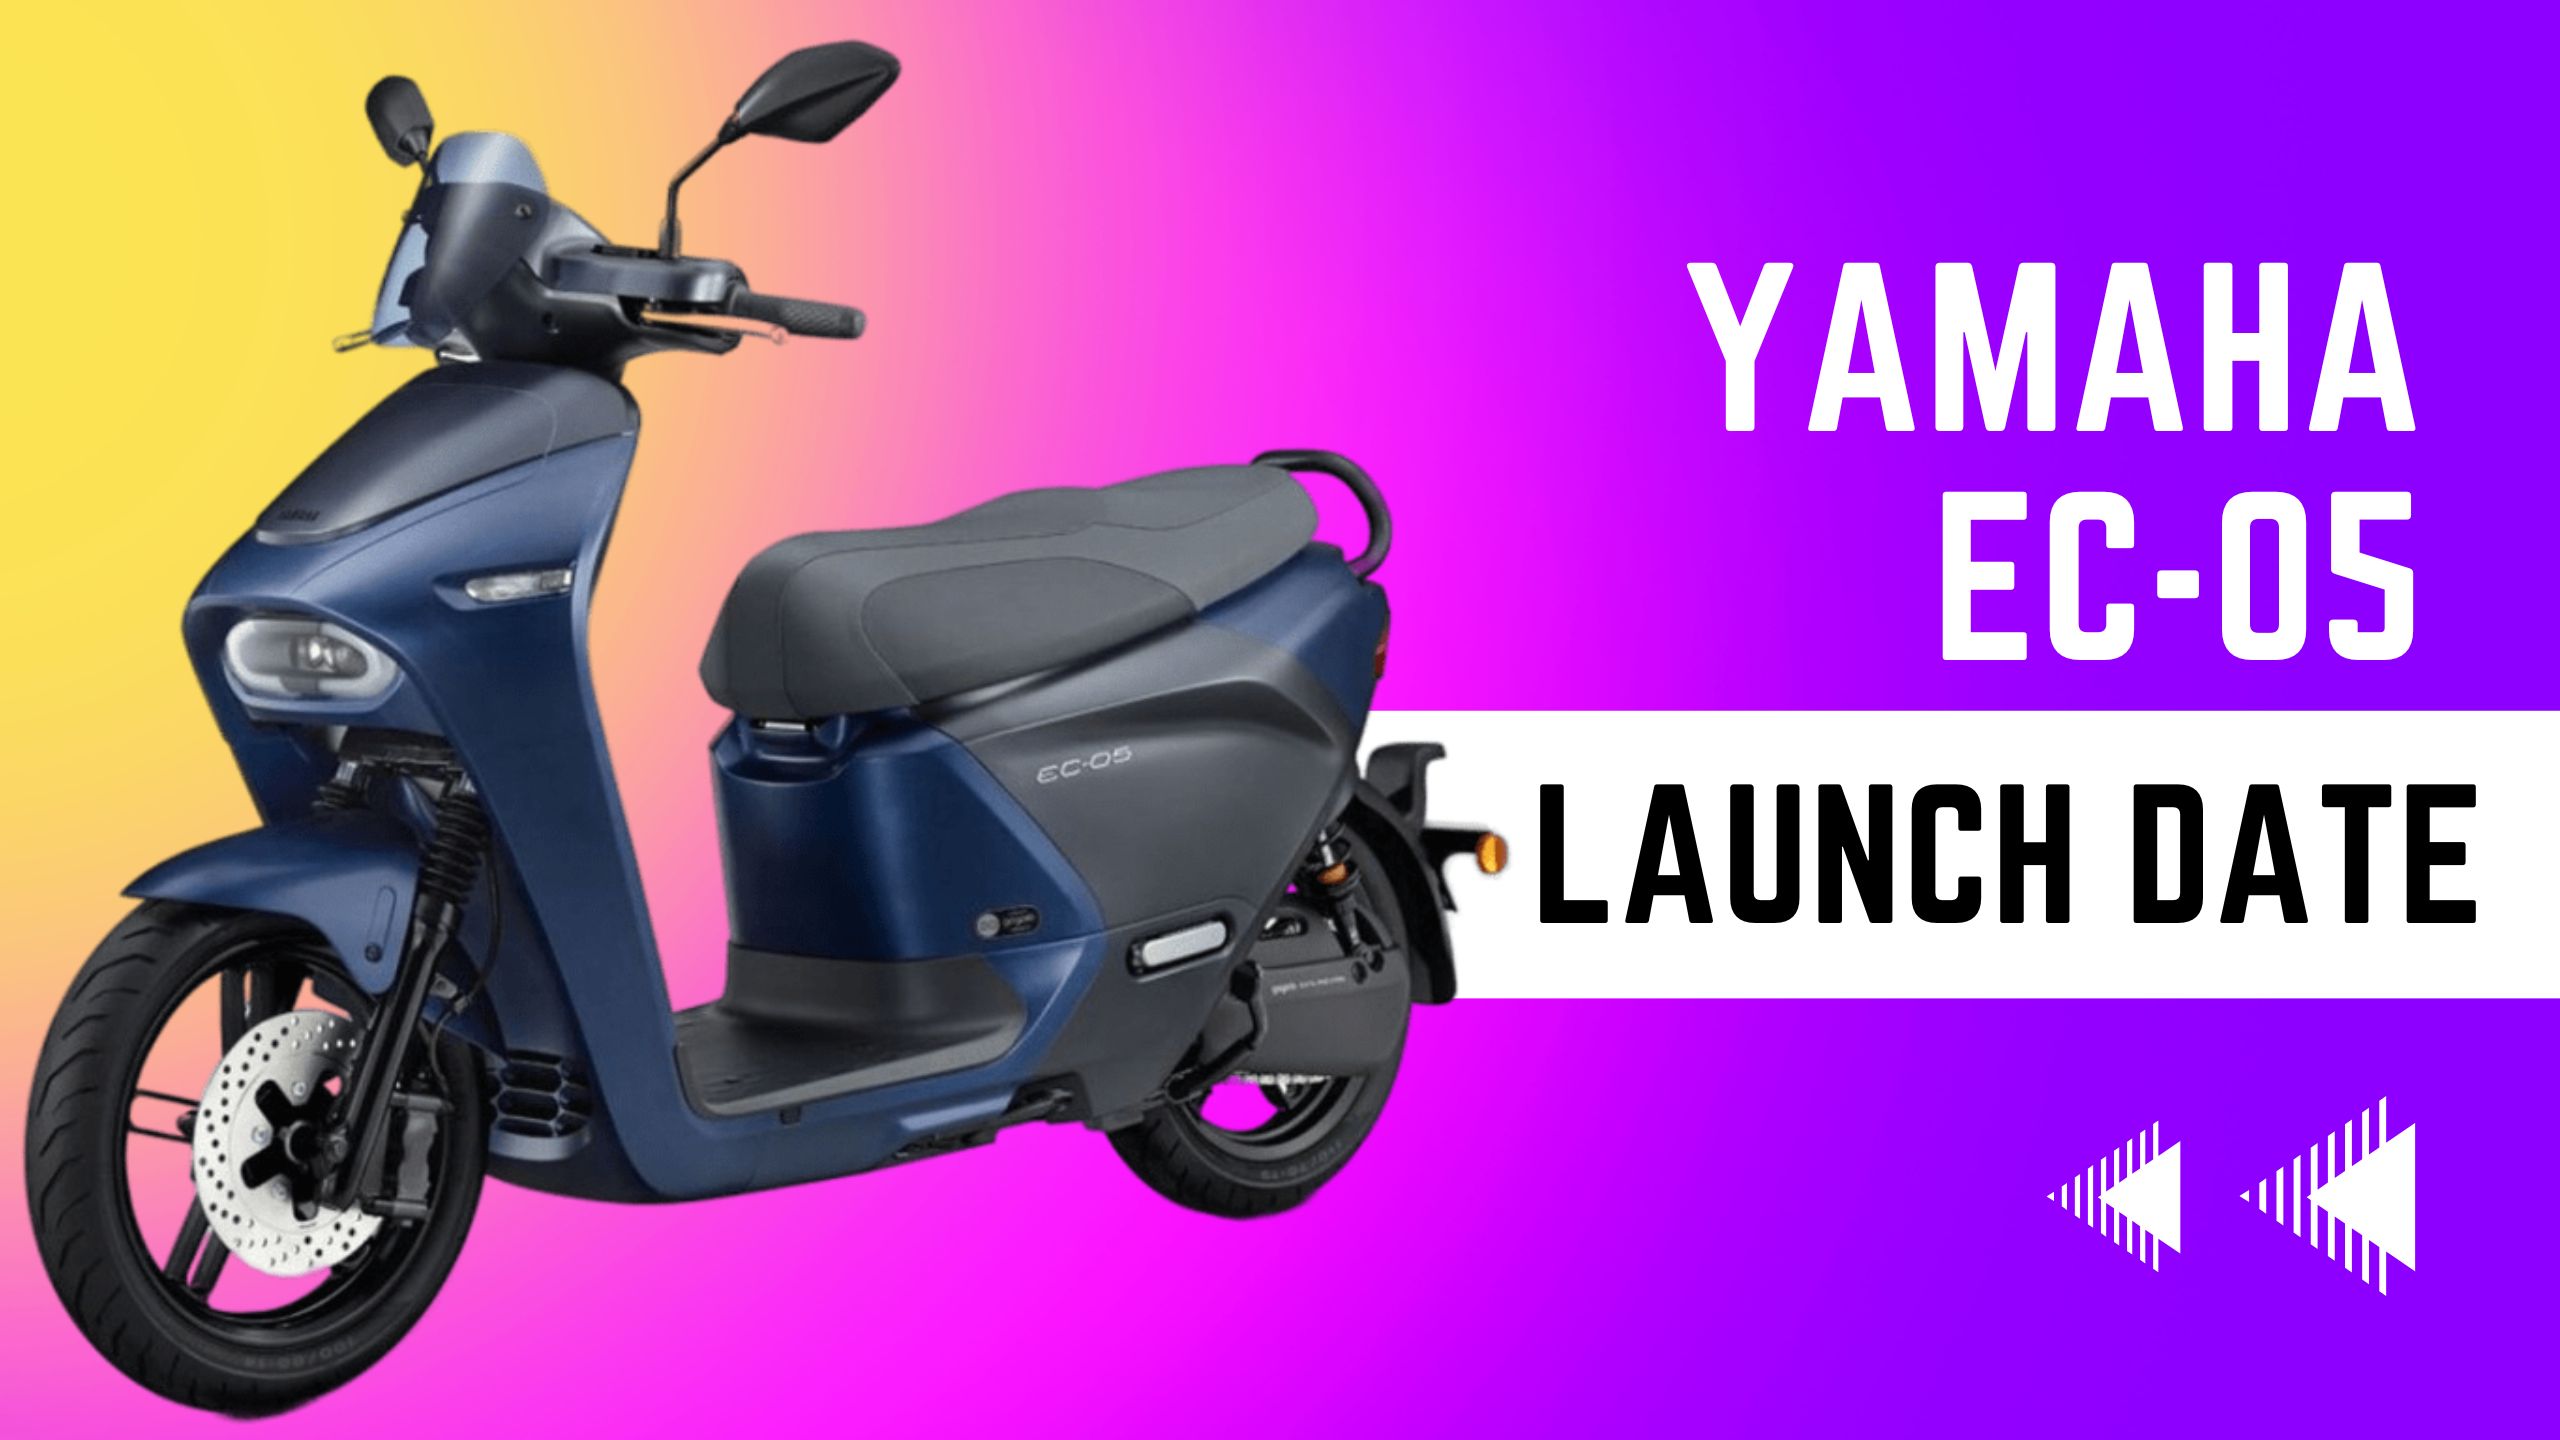 Yamaha EC-05 Electric Scooter Incoming, But There’s A Catch